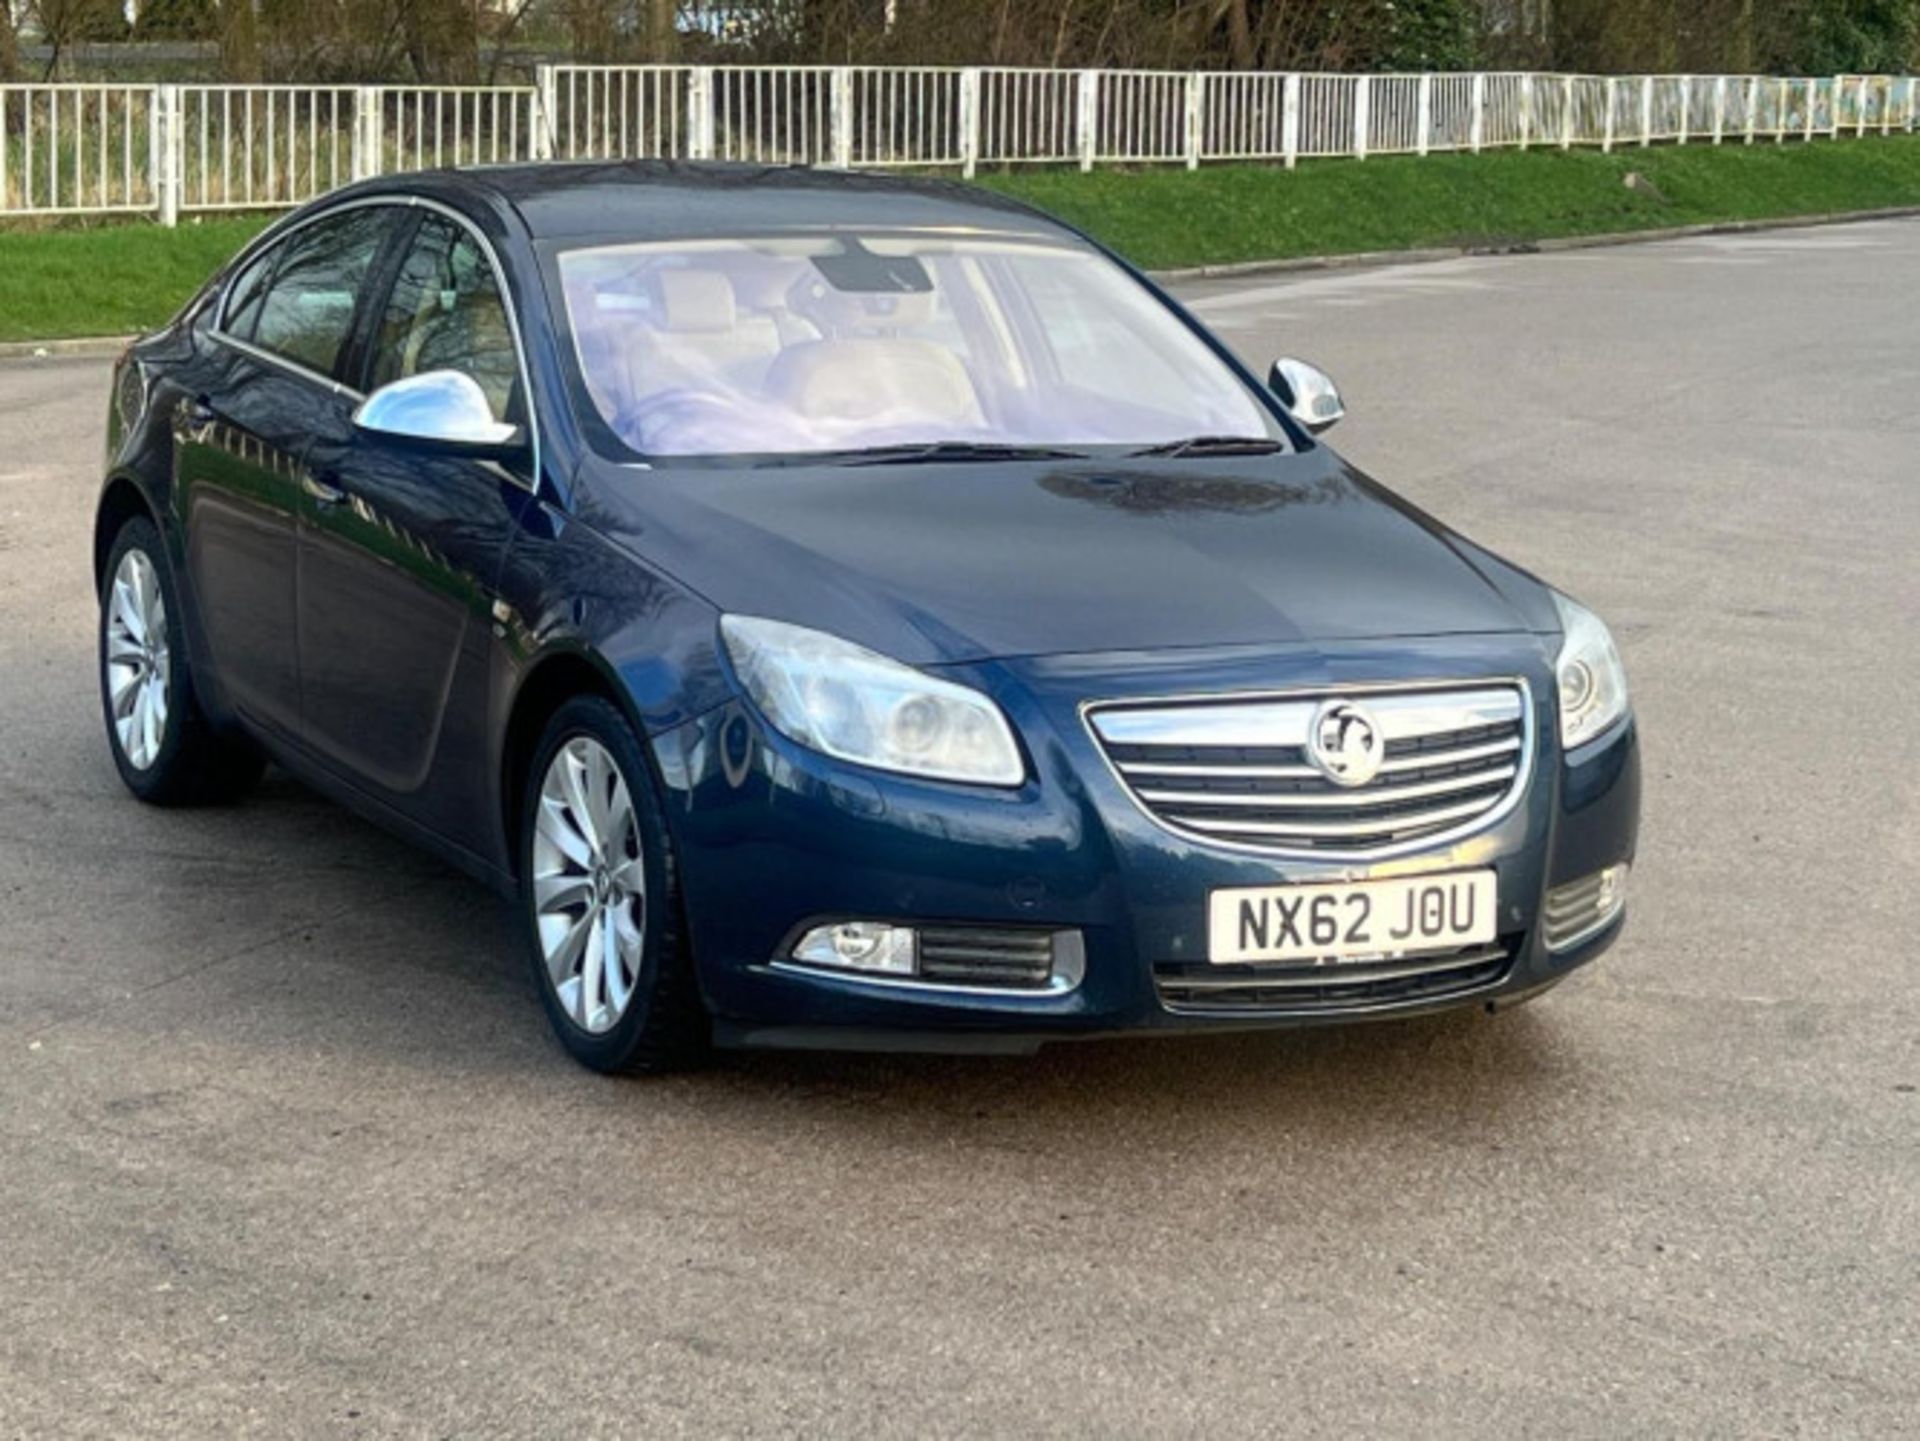 2012 VAUXHALL INSIGNIA 2.0 CDTI ELITE AUTO EURO 5 - DISCOVER EXCELLENCE >>--NO VAT ON HAMMER--<< - Image 72 of 79